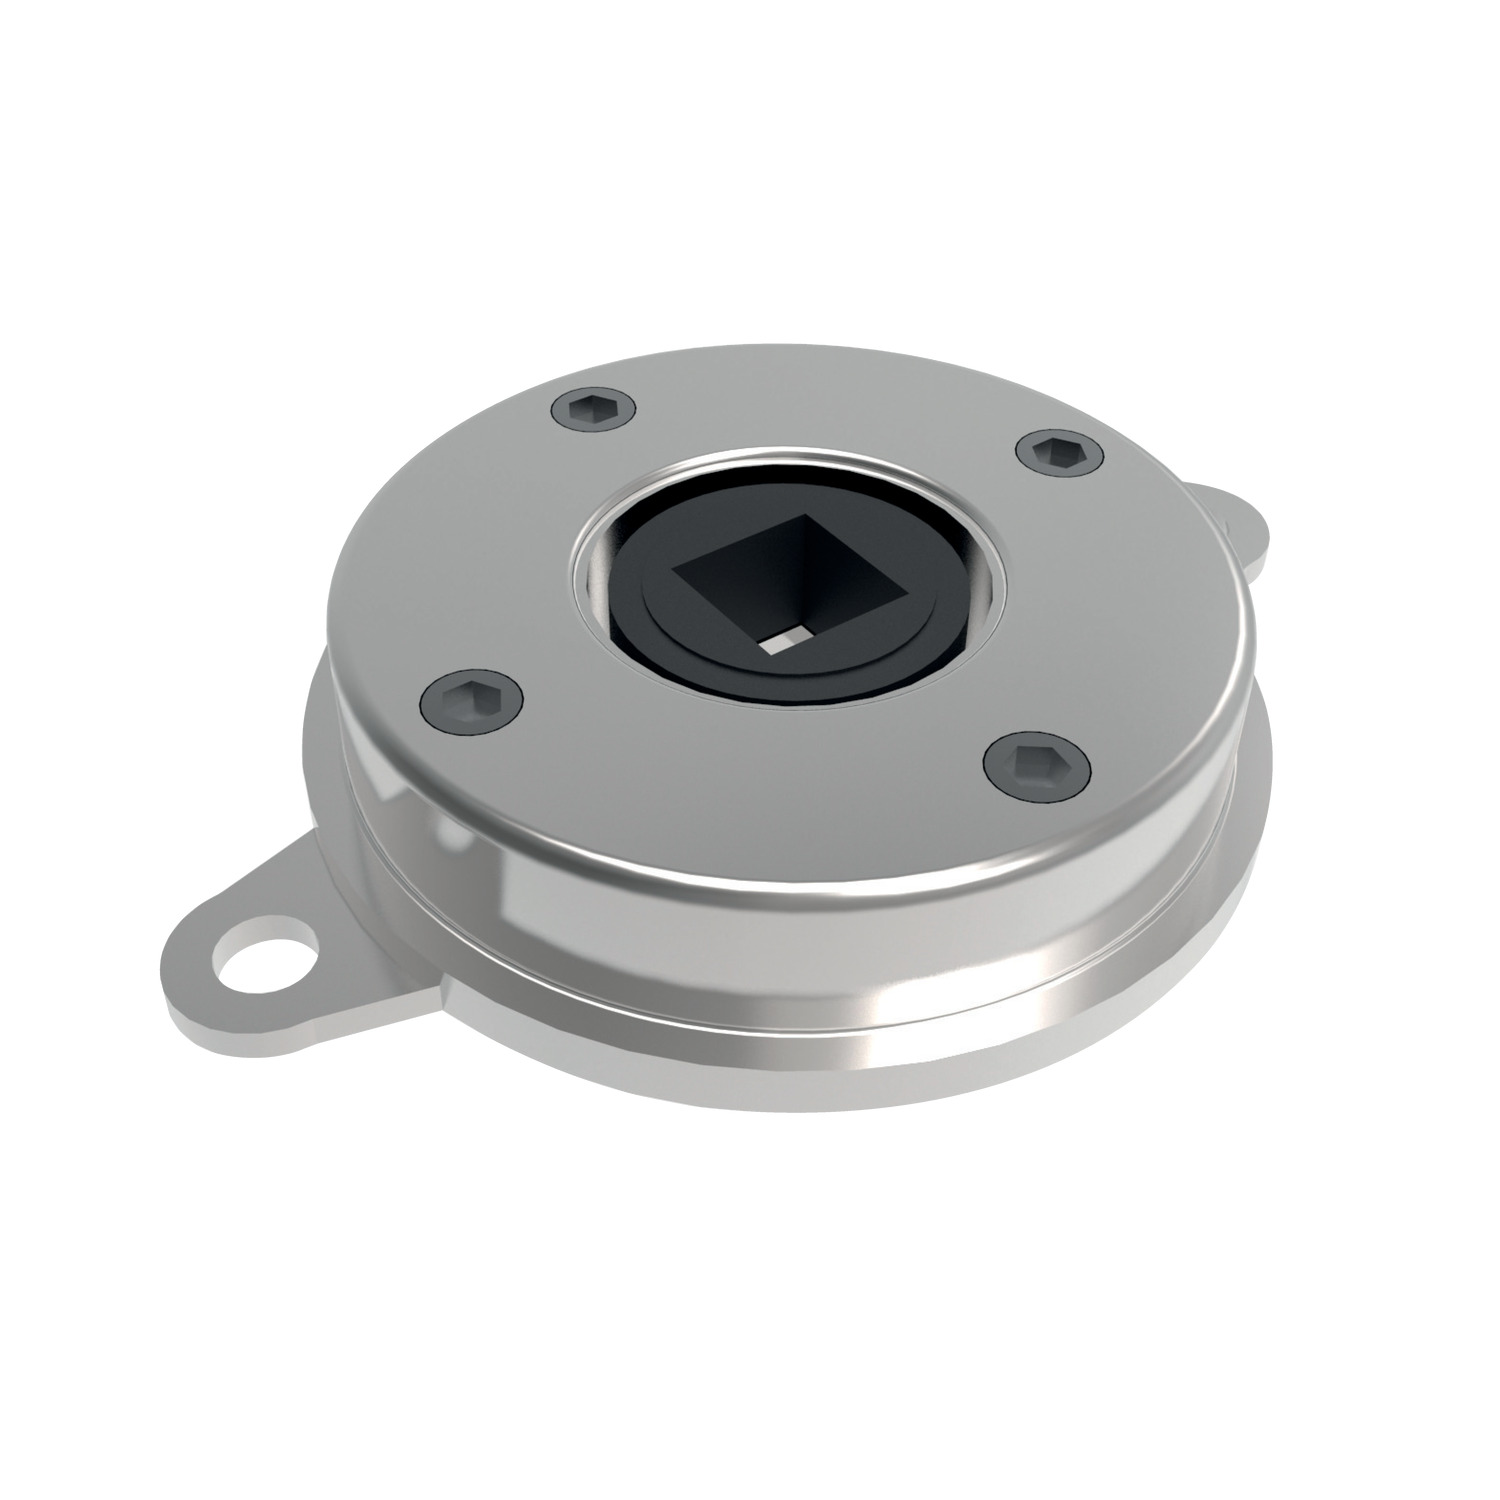 Product Q3200, Disk Dampers bi-directional - continuous rotation - up to 47 Kgf.cm / 